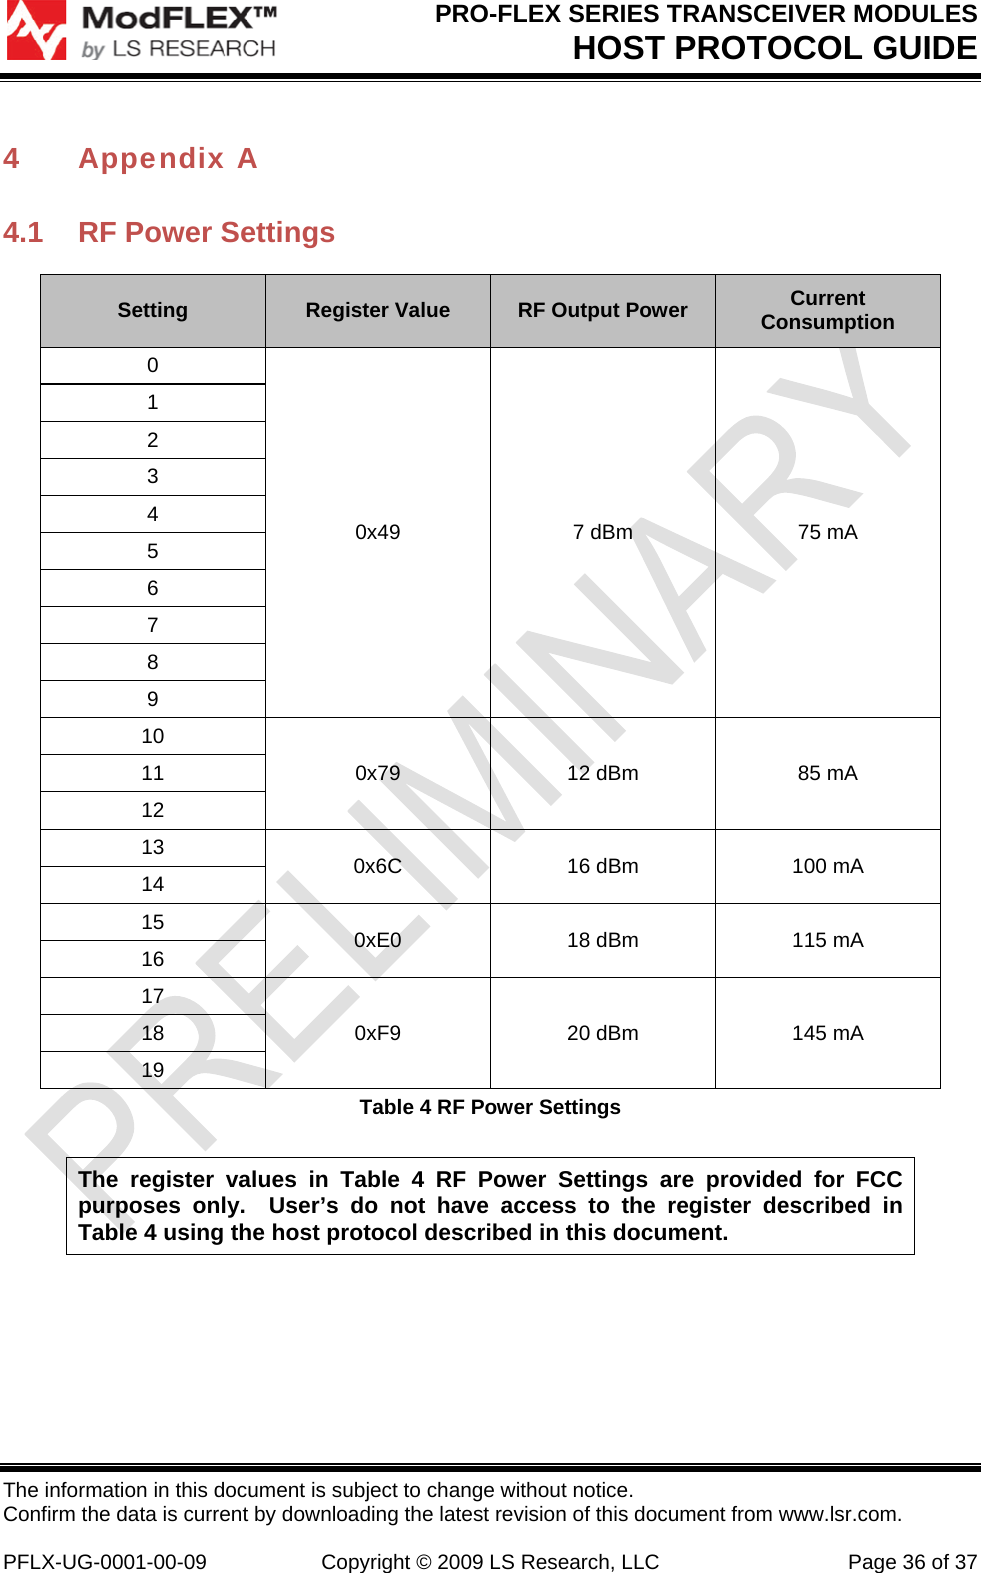 PRO-FLEX SERIES TRANSCEIVER MODULES HOST PROTOCOL GUIDE The information in this document is subject to change without notice. Confirm the data is current by downloading the latest revision of this document from www.lsr.com.  PFLX-UG-0001-00-09  Copyright © 2009 LS Research, LLC  Page 36 of 37 4 Appendix A 4.1  RF Power Settings Setting  Register Value  RF Output Power  Current Consumption 0 0x49  7 dBm  75 mA 1 2 3 4 5 6 7 8 9 10 0x79  12 dBm  85 mA 11 12 13  0x6C  16 dBm  100 mA 14 15  0xE0  18 dBm  115 mA 16 17 0xF9  20 dBm  145 mA 18 19 Table 4 RF Power Settings The register values in Table 4 RF Power Settings are provided for FCC purposes only.  User’s do not have access to the register described in Table 4 using the host protocol described in this document. 